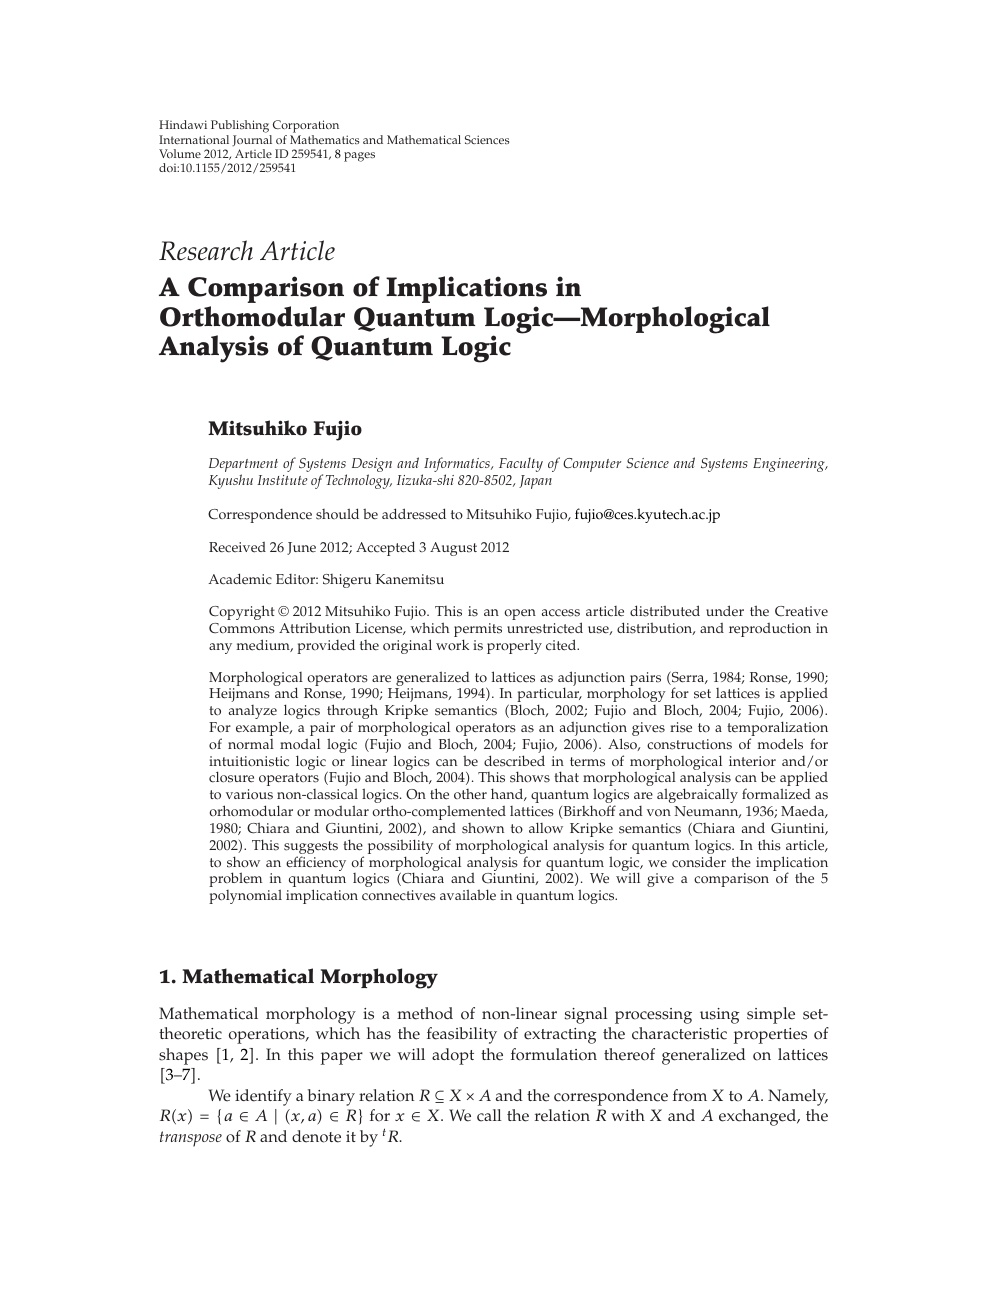 A Comparison Of Implications In Orthomodular Quantum Logic Morphological Analysis Of Quantum Logic Topic Of Research Paper In Mathematics Download Scholarly Article Pdf And Read For Free On Cyberleninka Open Science Hub